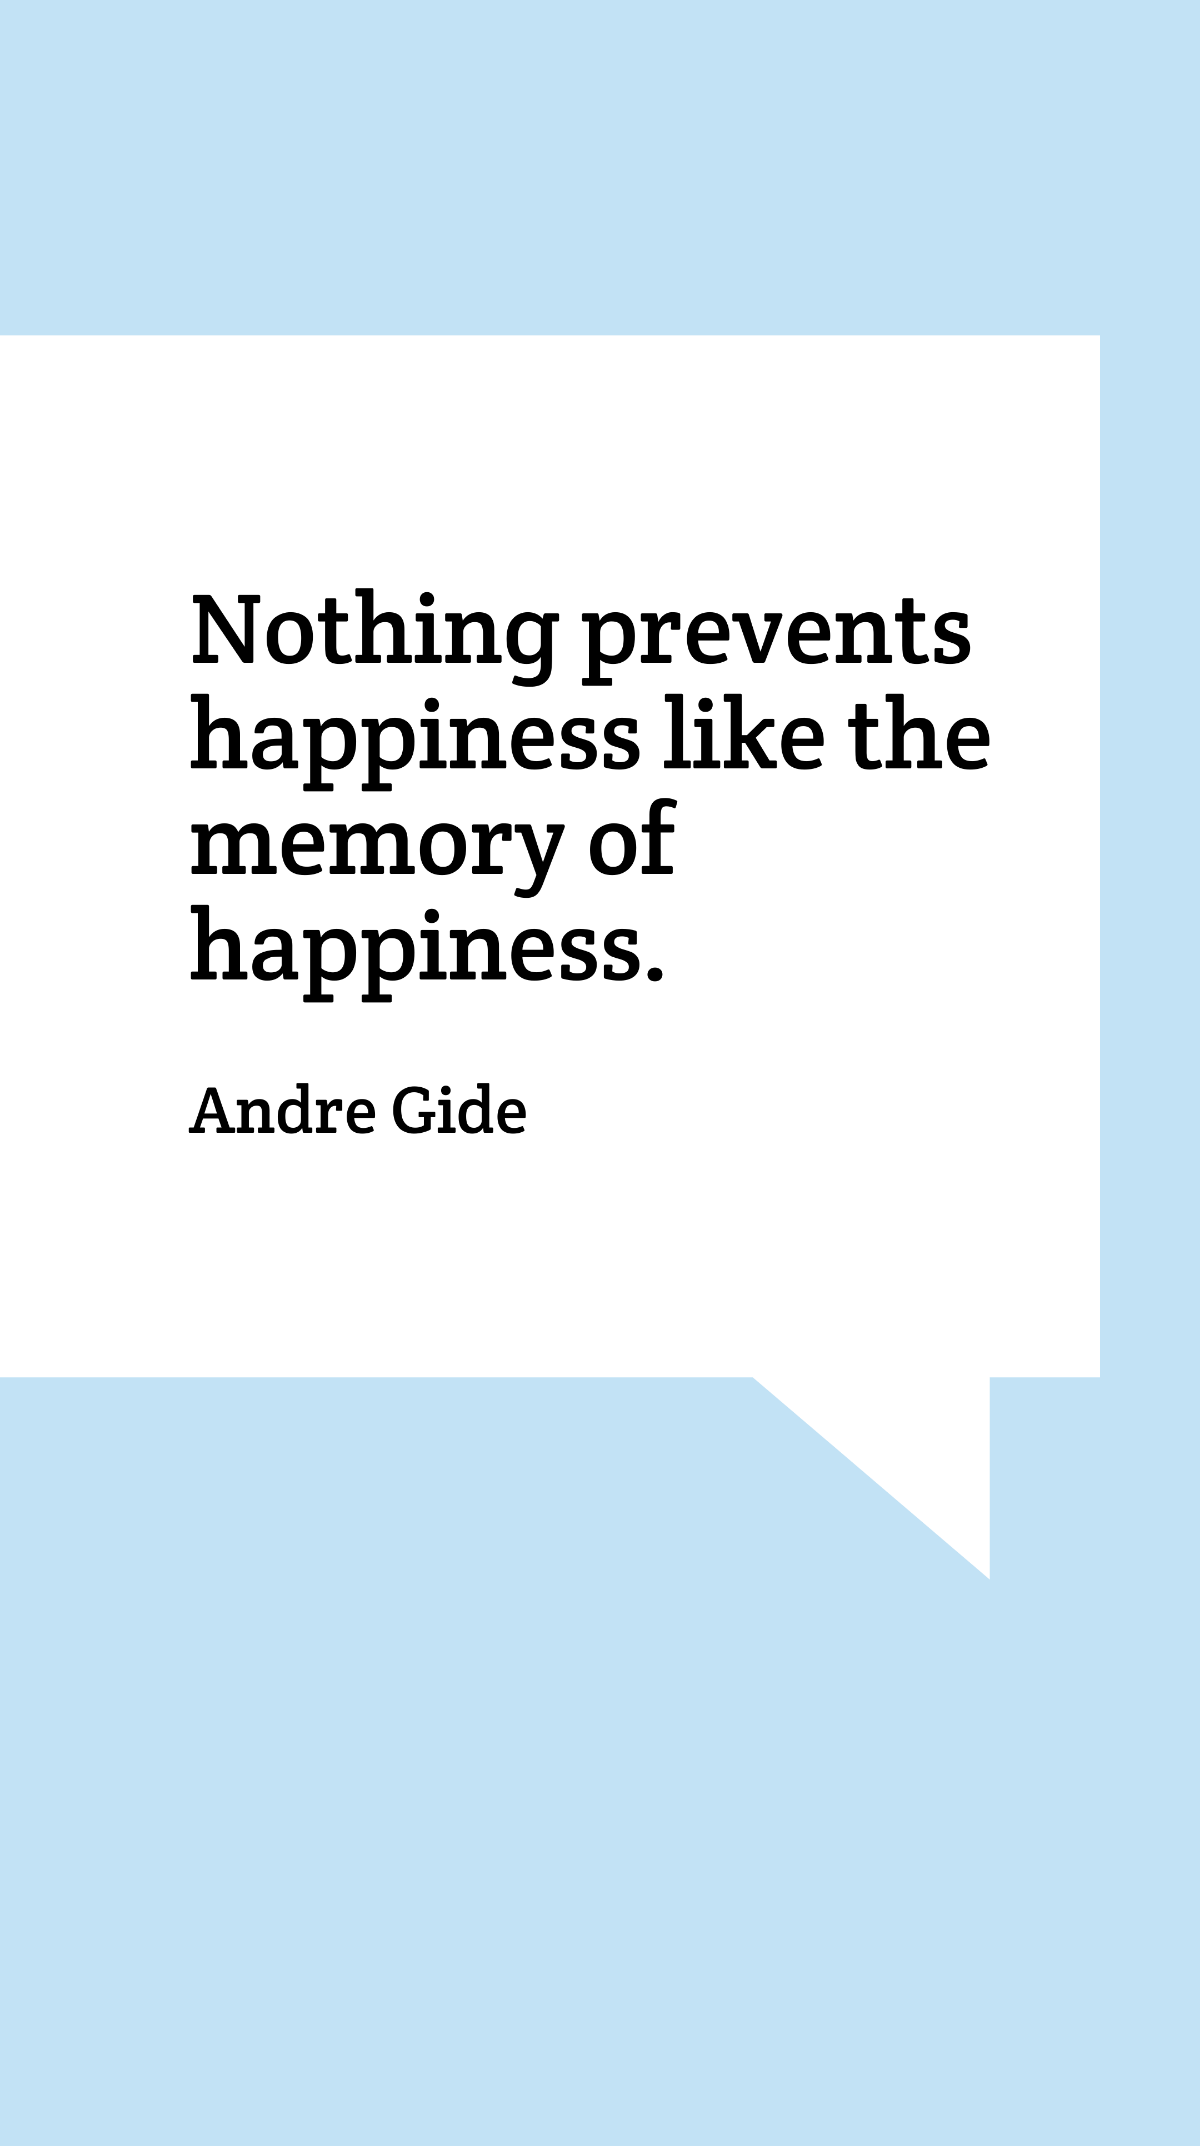 Andre Gide - Nothing prevents happiness like the memory of happiness. Template